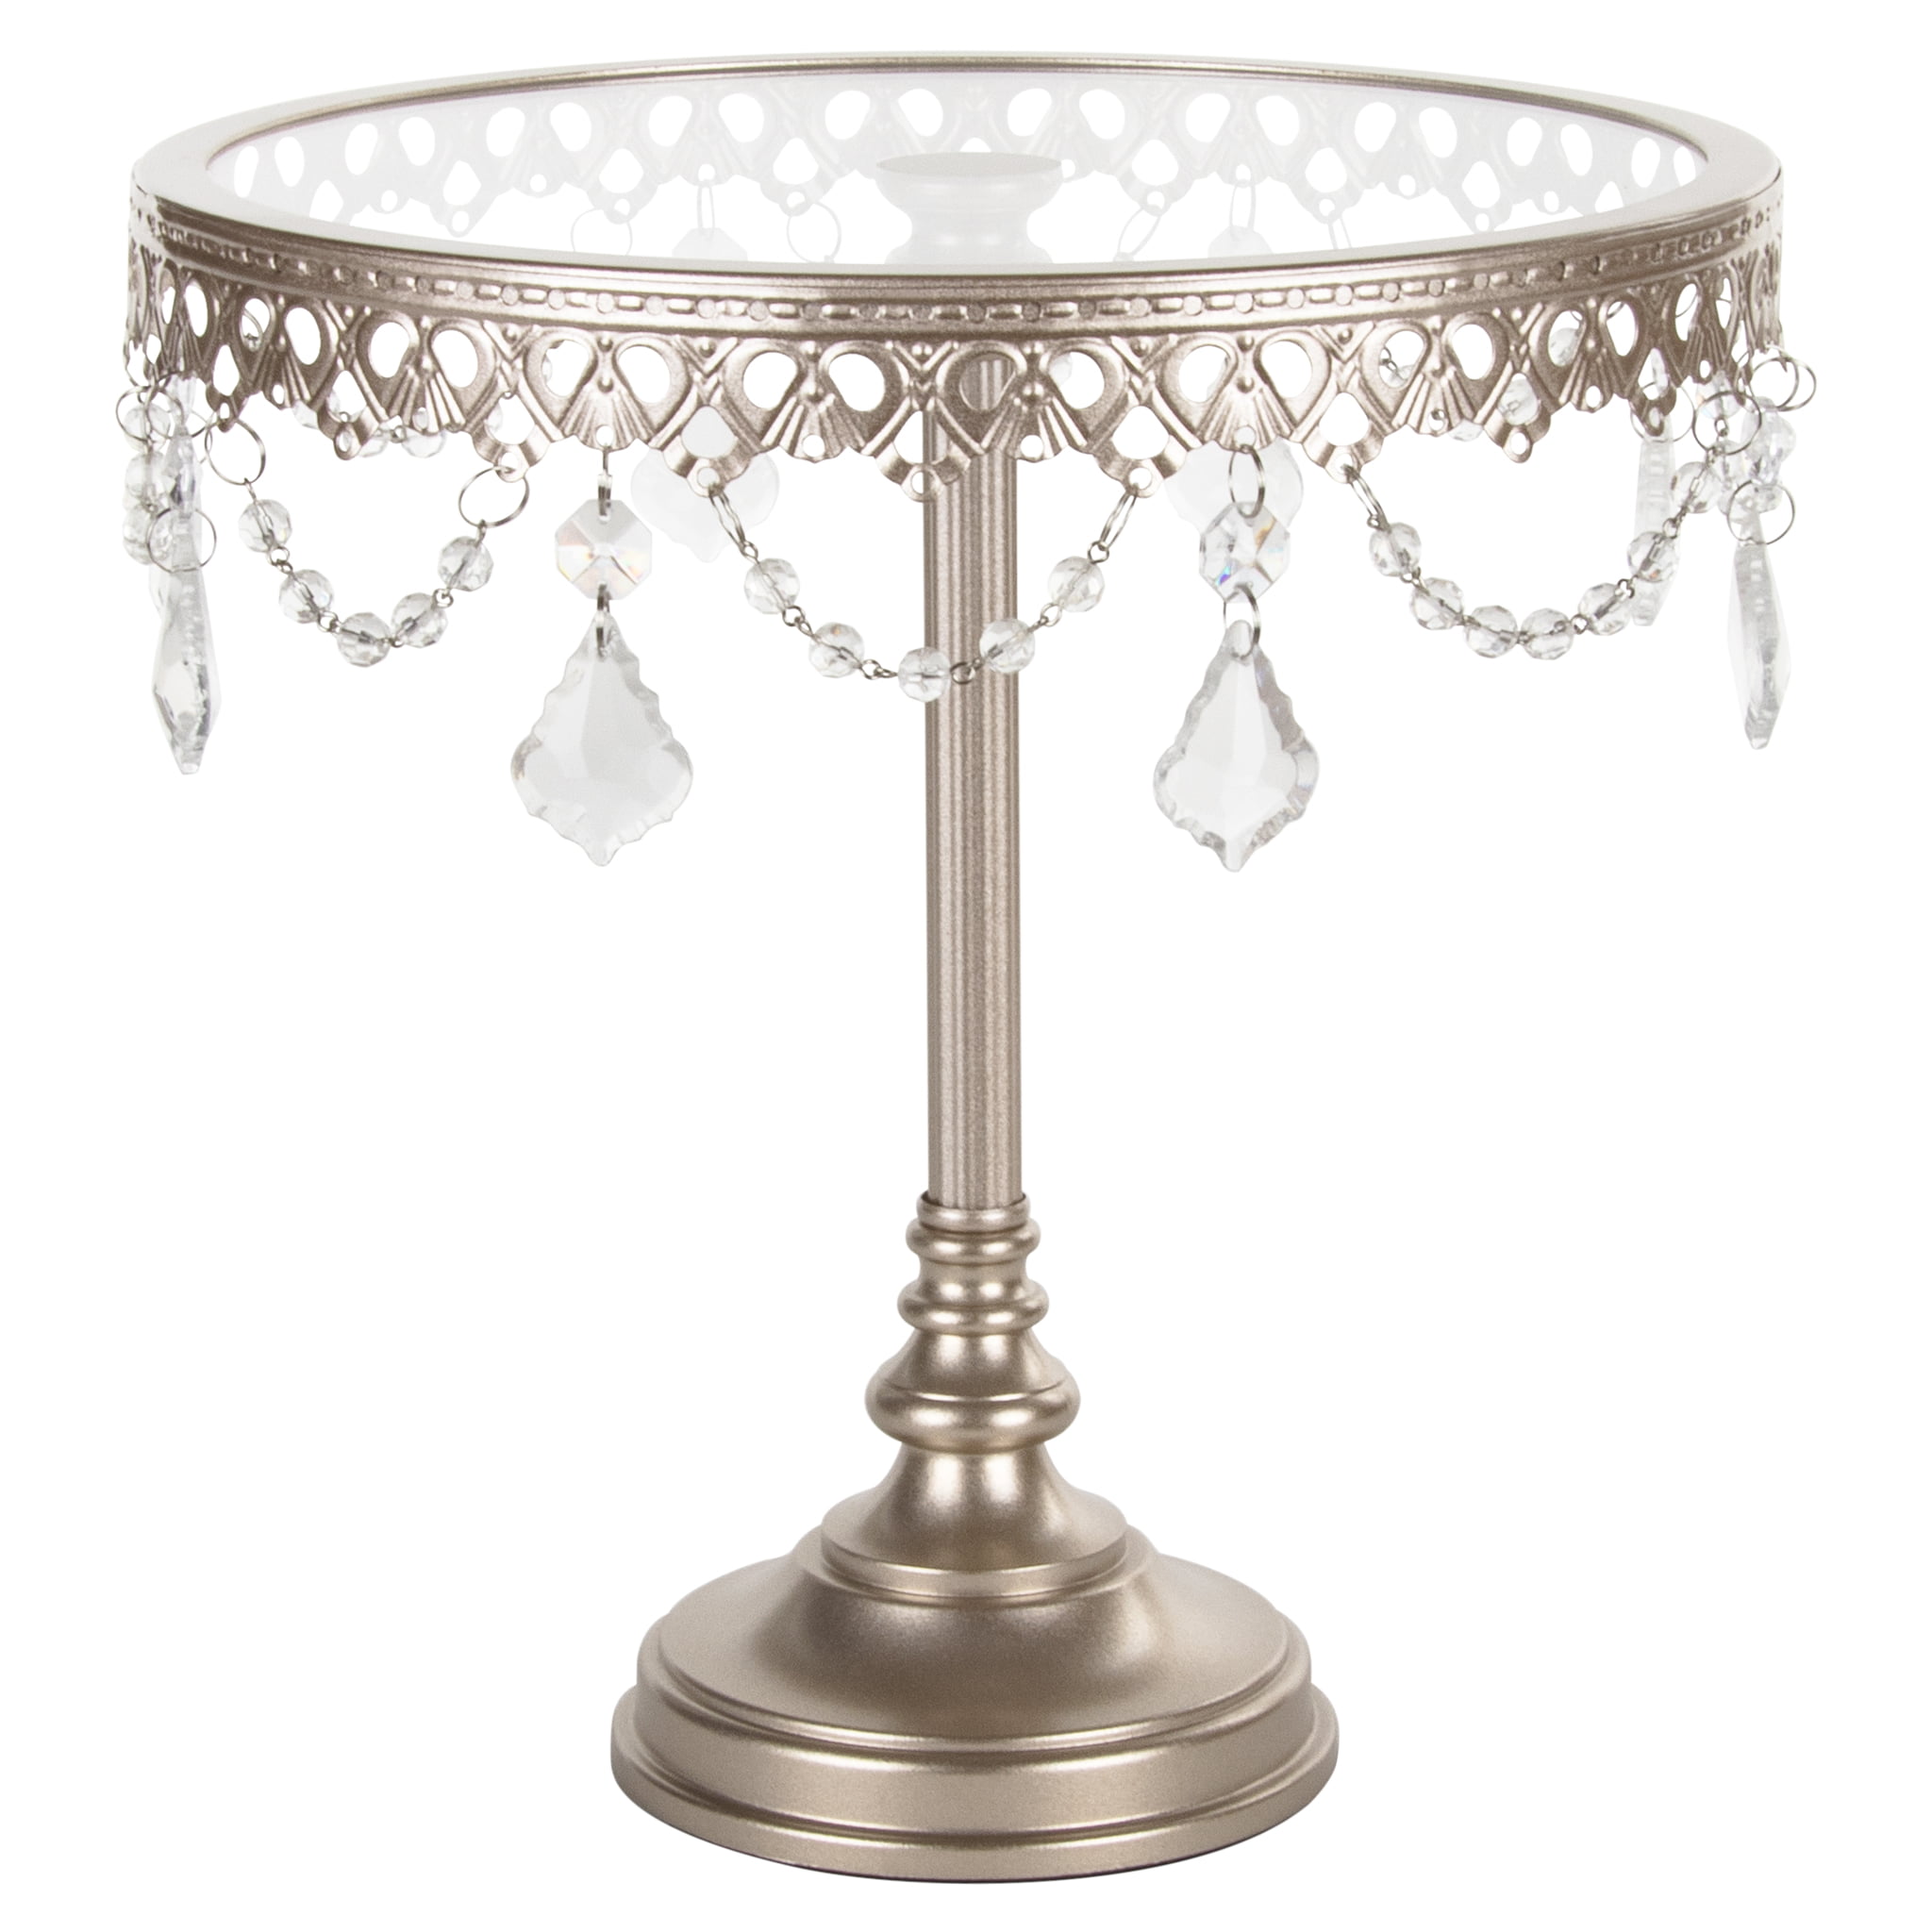 Round Metal Pedestal Holder with Crystals 10 Inches Pink Amalfi Decor Cake Stand 